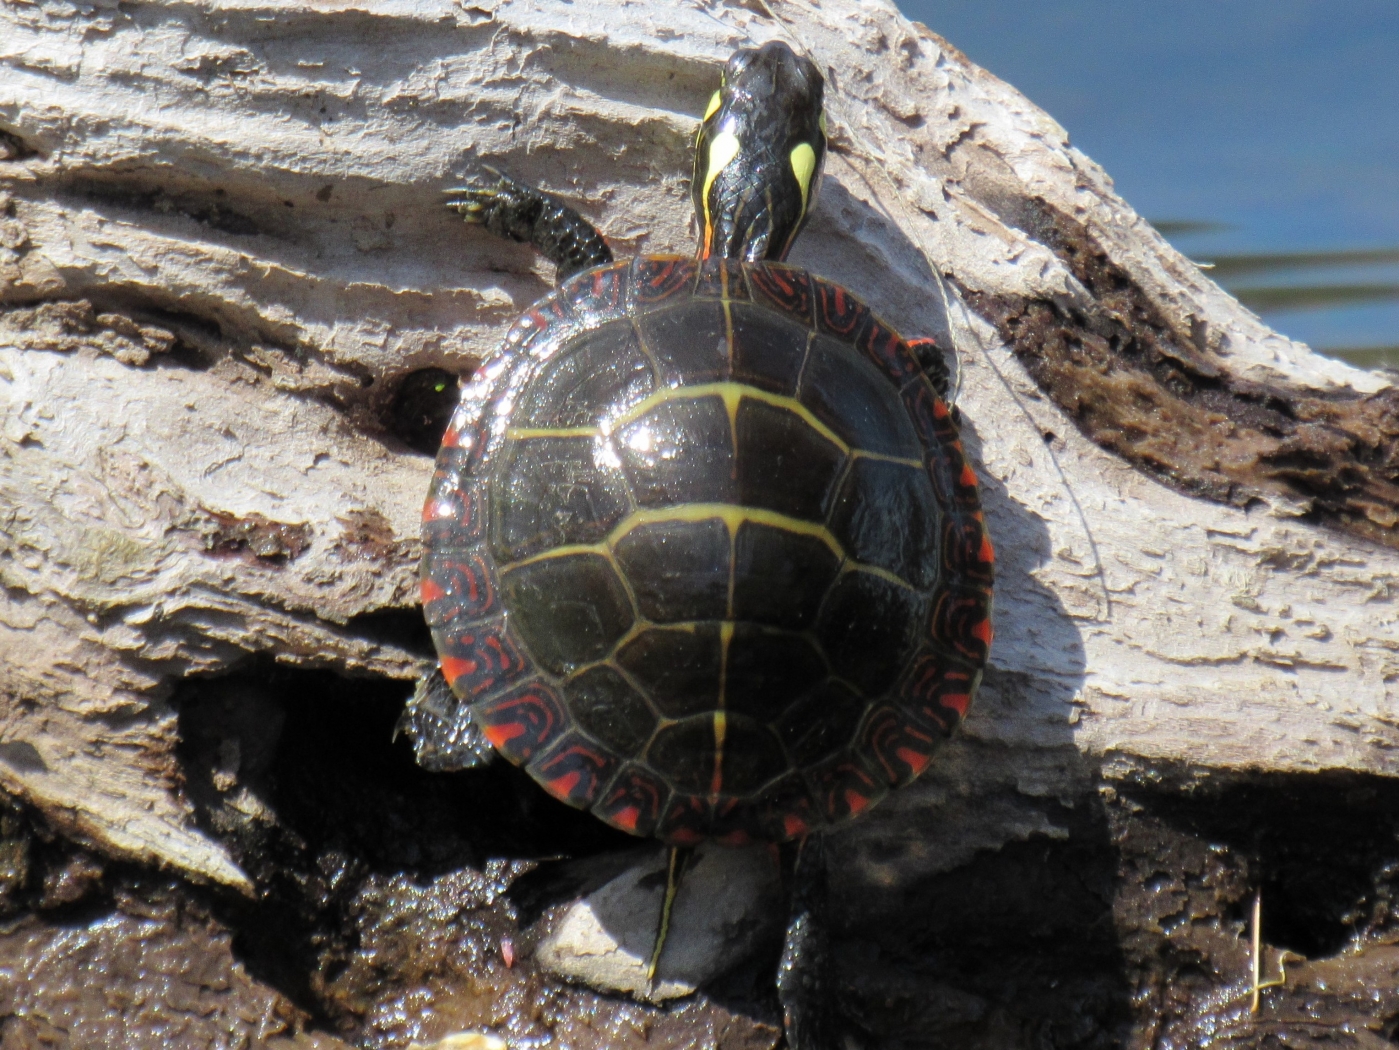 Painted Turtle by James Haney